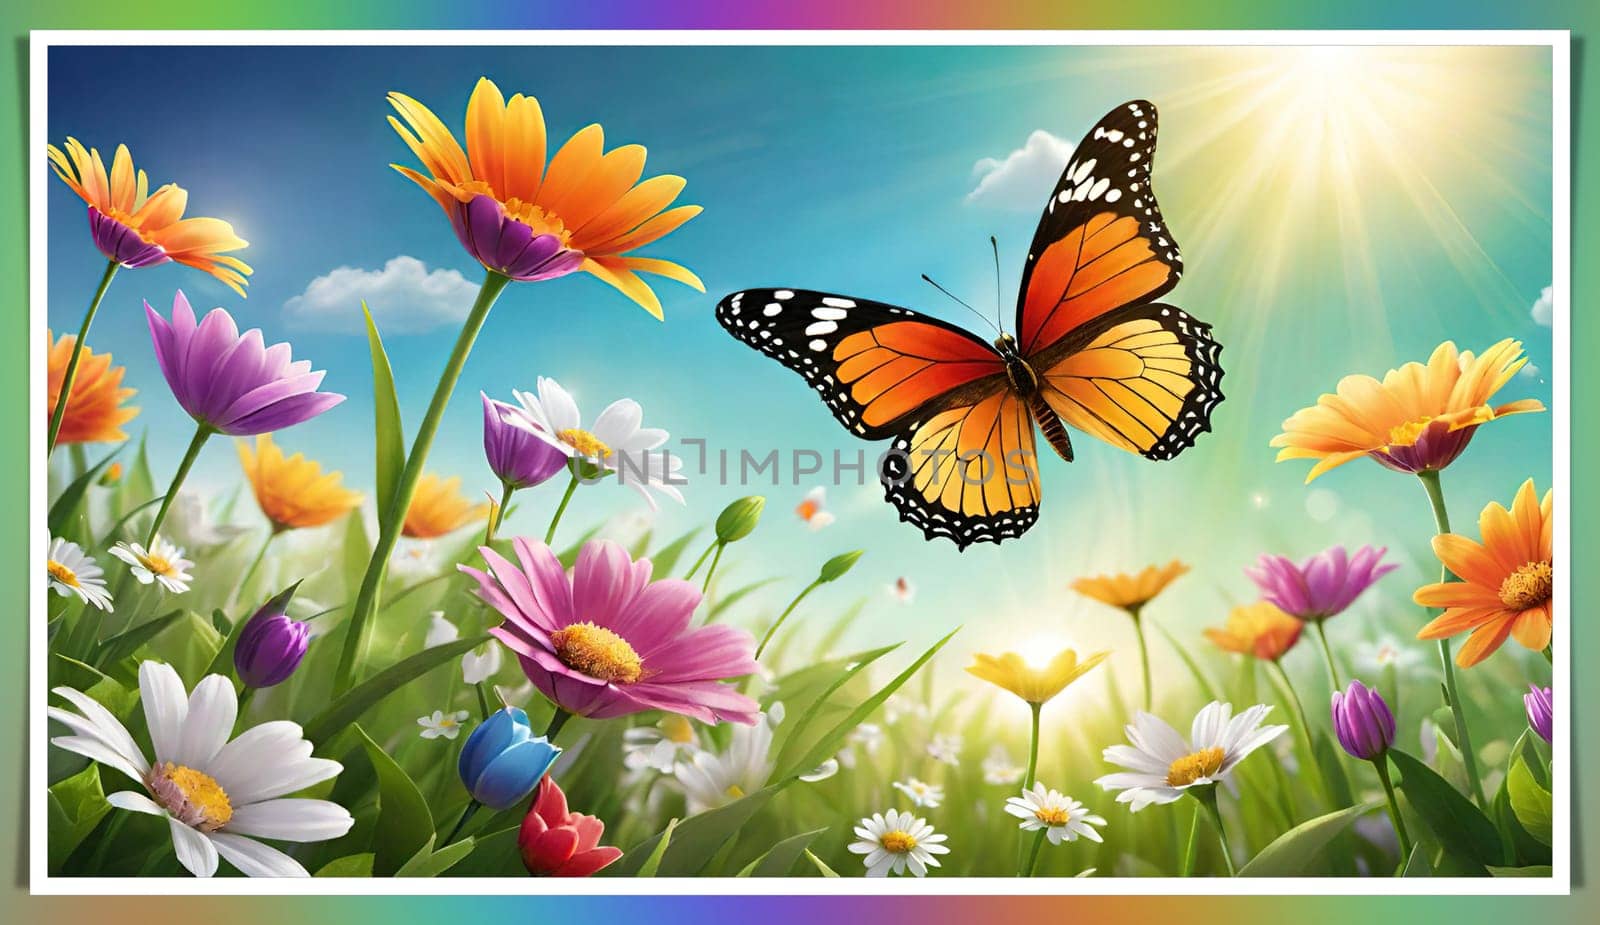 Colorful butterfly on daisy flowers with green grass and blue sky. by yilmazsavaskandag